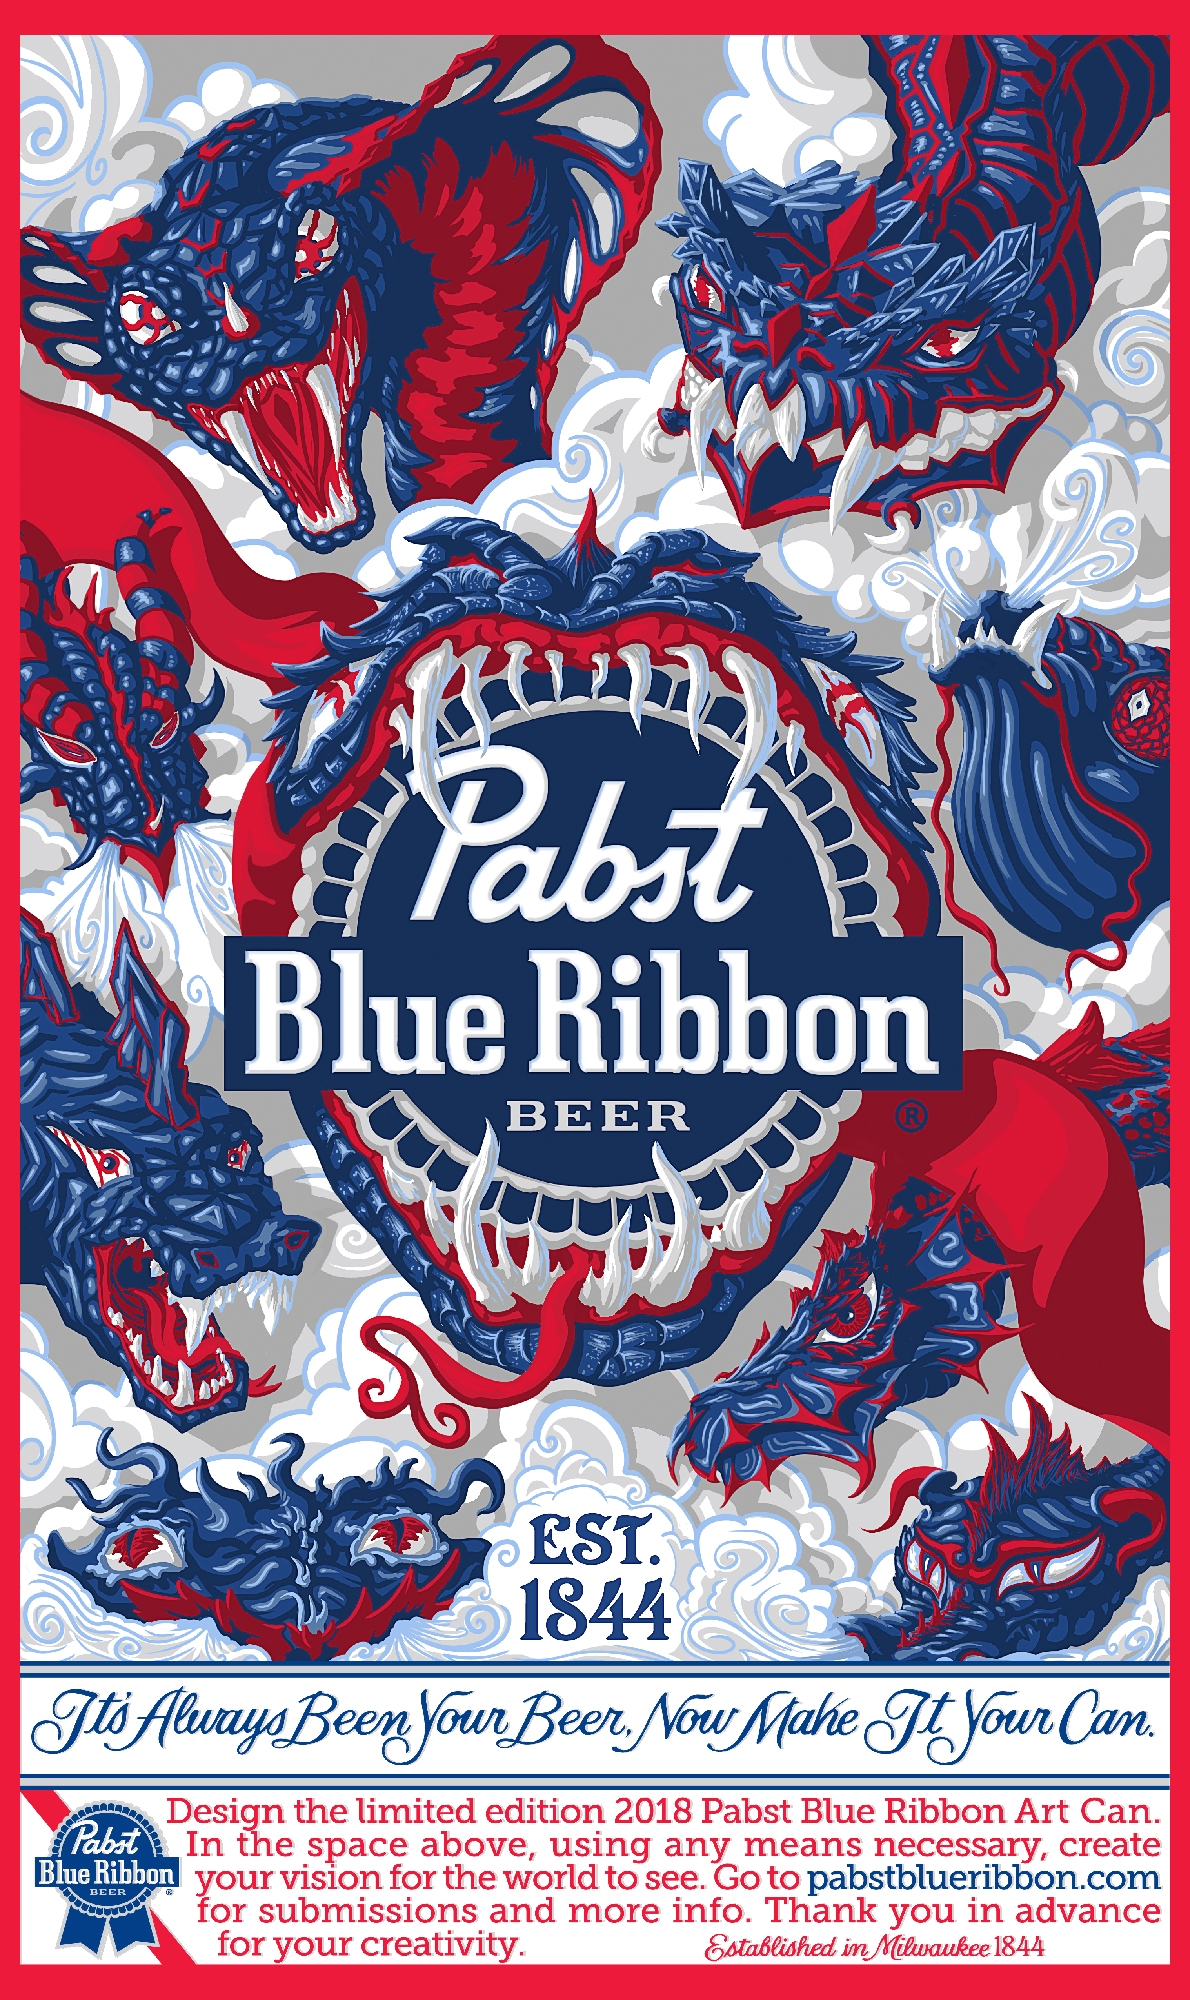 Final Piece for Pabst Blue Ribbon Competition Art 2018